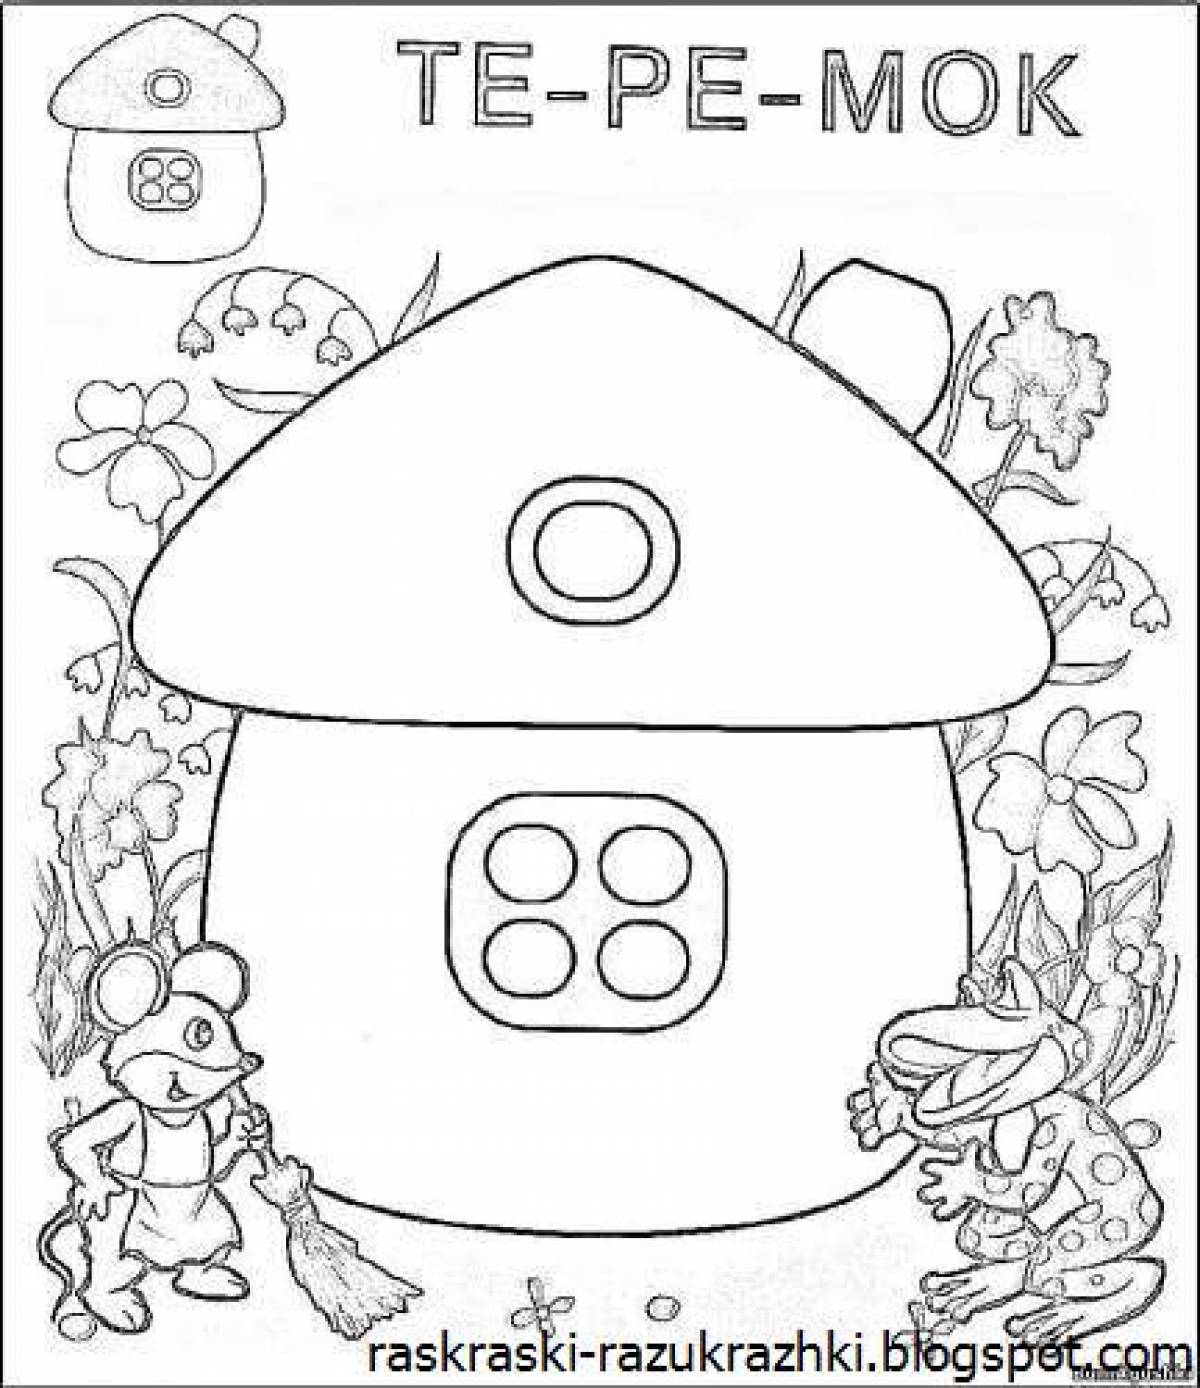 Playful teremok coloring book for children